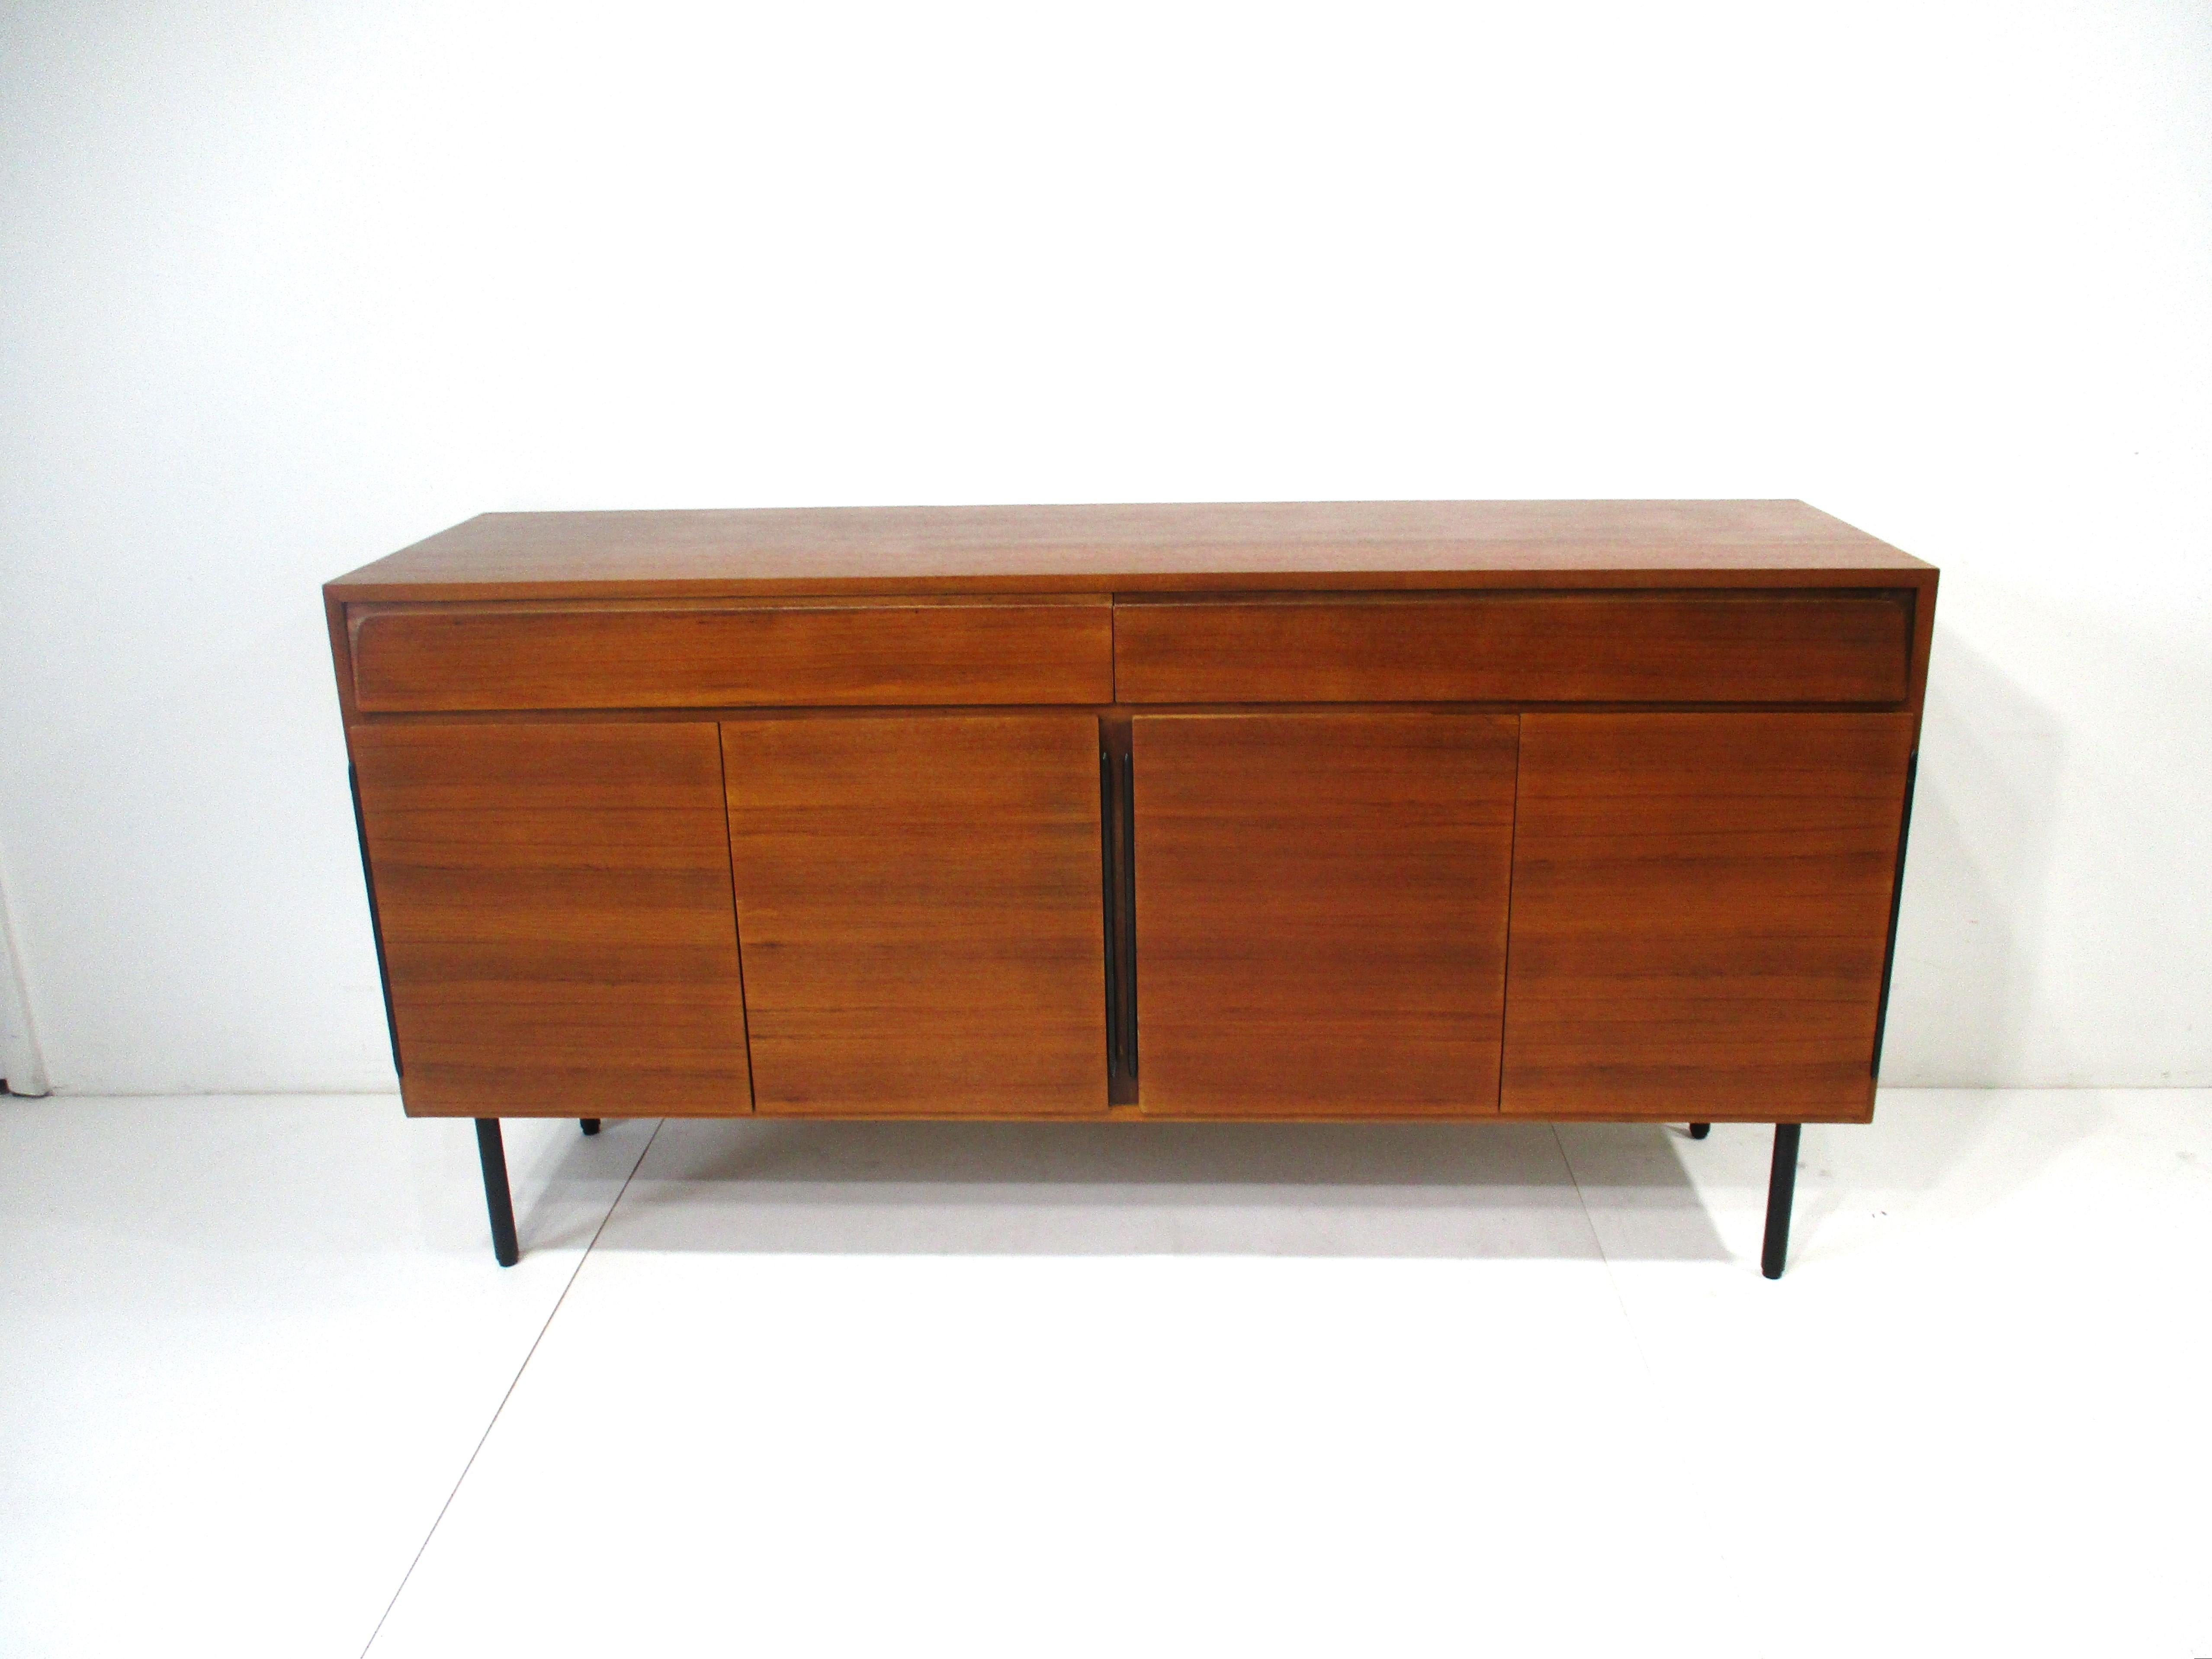 A teak wood credenza / sideboard with four doors , storage and adjustable shelves in a lighter wood . Having two drawers with one open and the other with dividers for separate compartments and detailed with satin black hinges and black metal legs .